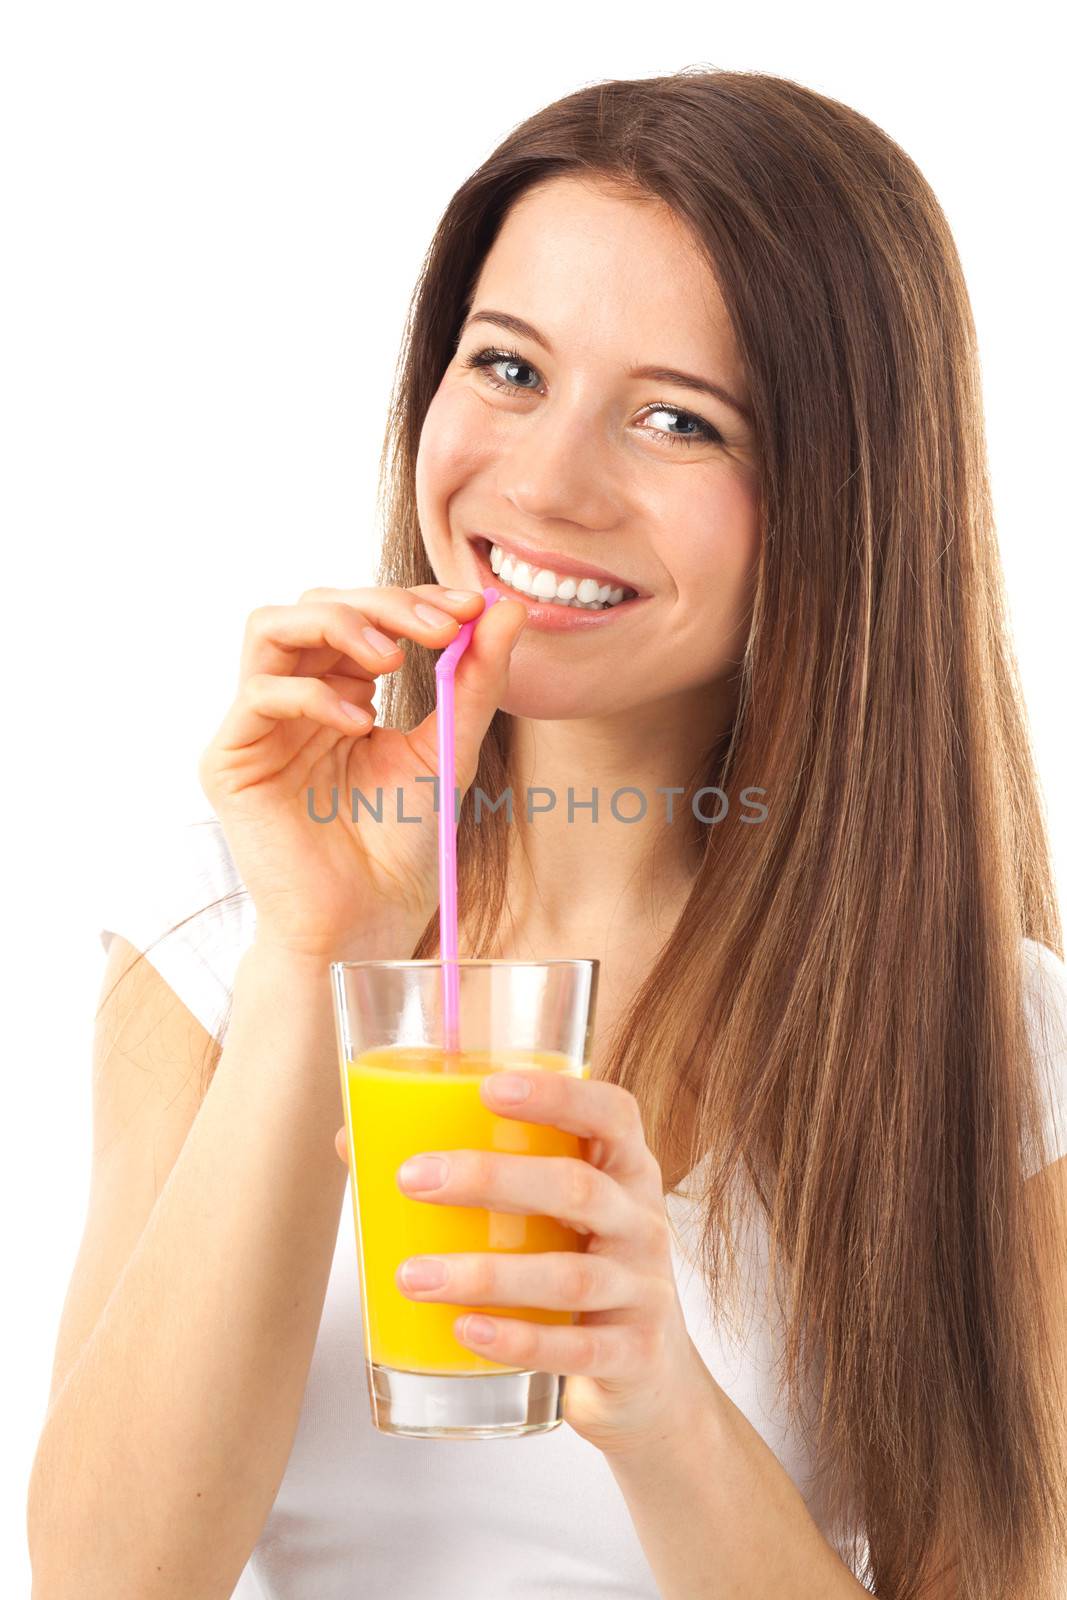 Nice young woman with a glass of orange juice, isolated on white
